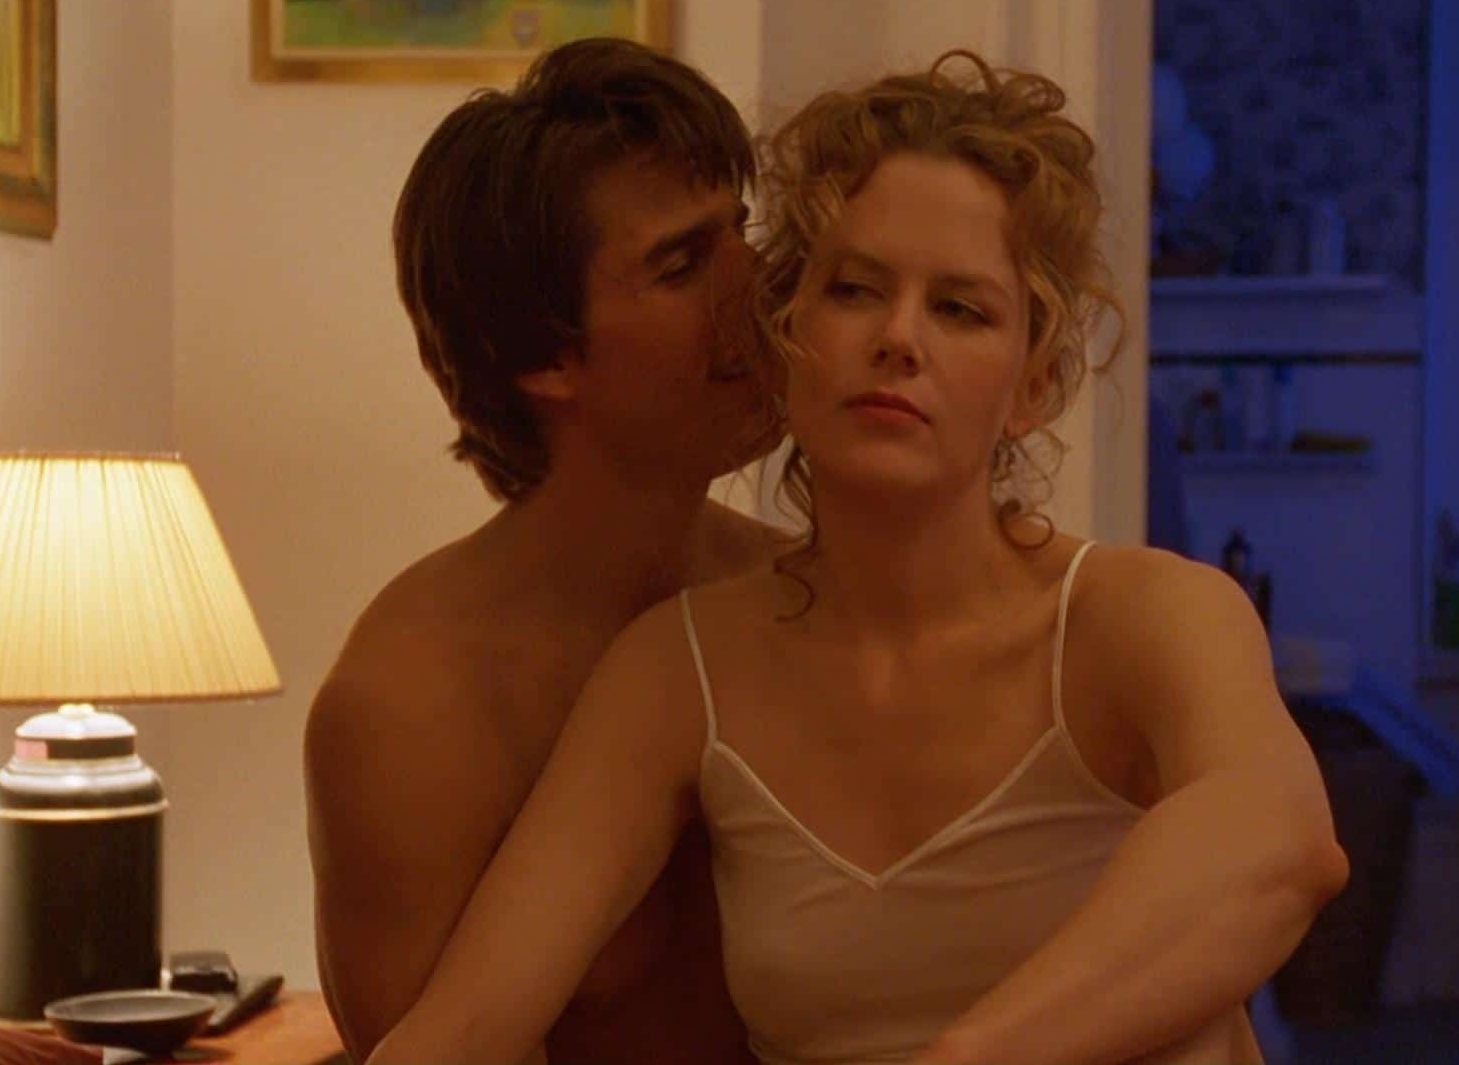 2. He was Stanley Kubrick’s first choice to star in Eyes Wide Shut.